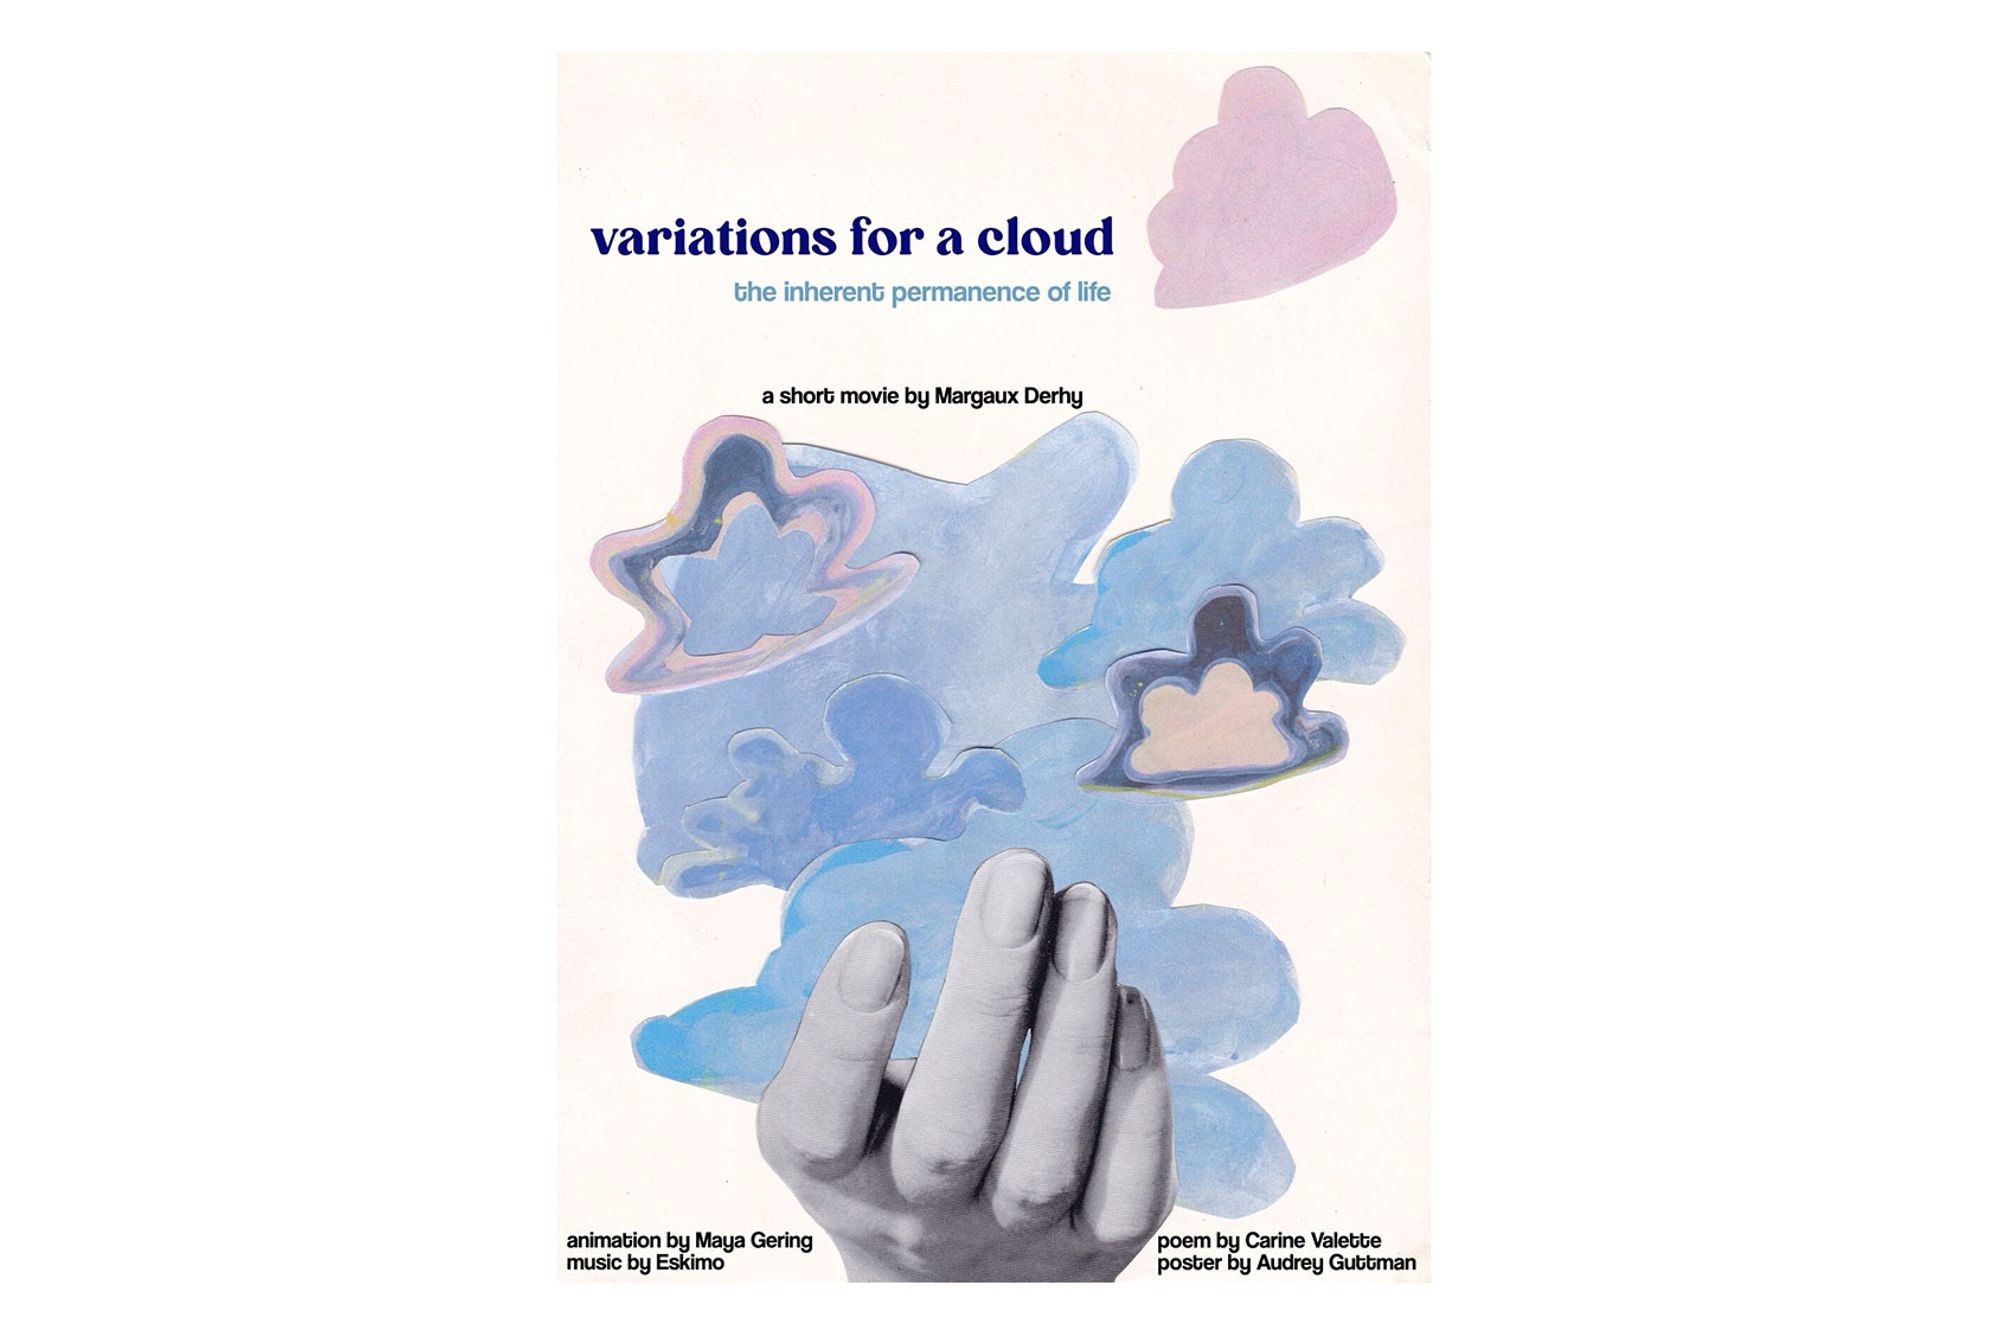 Variations for a cloud poster